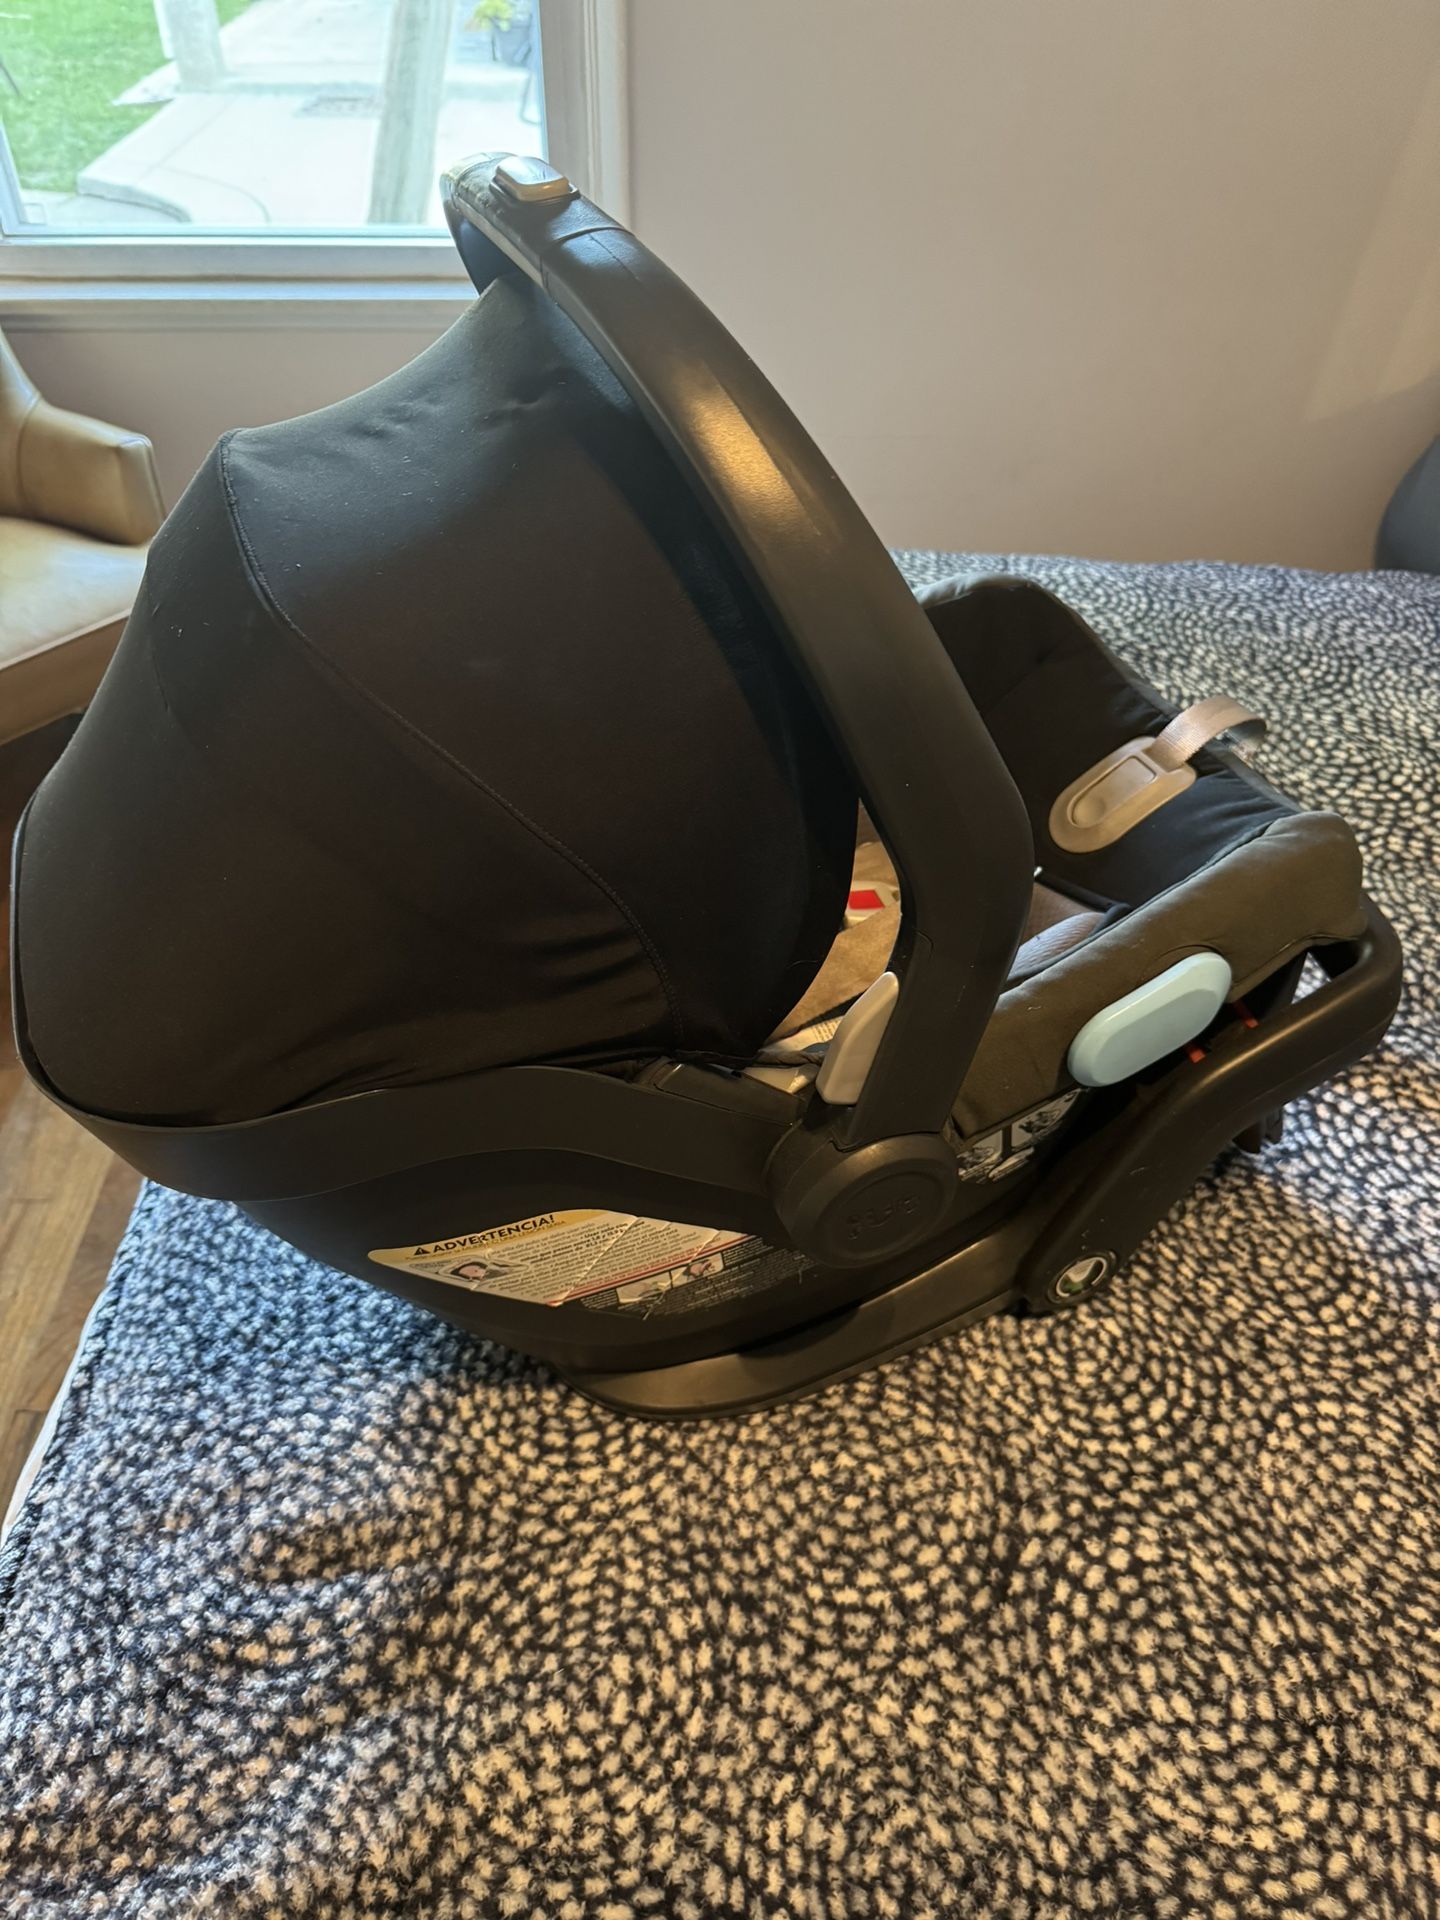 Uppababy Car seat 